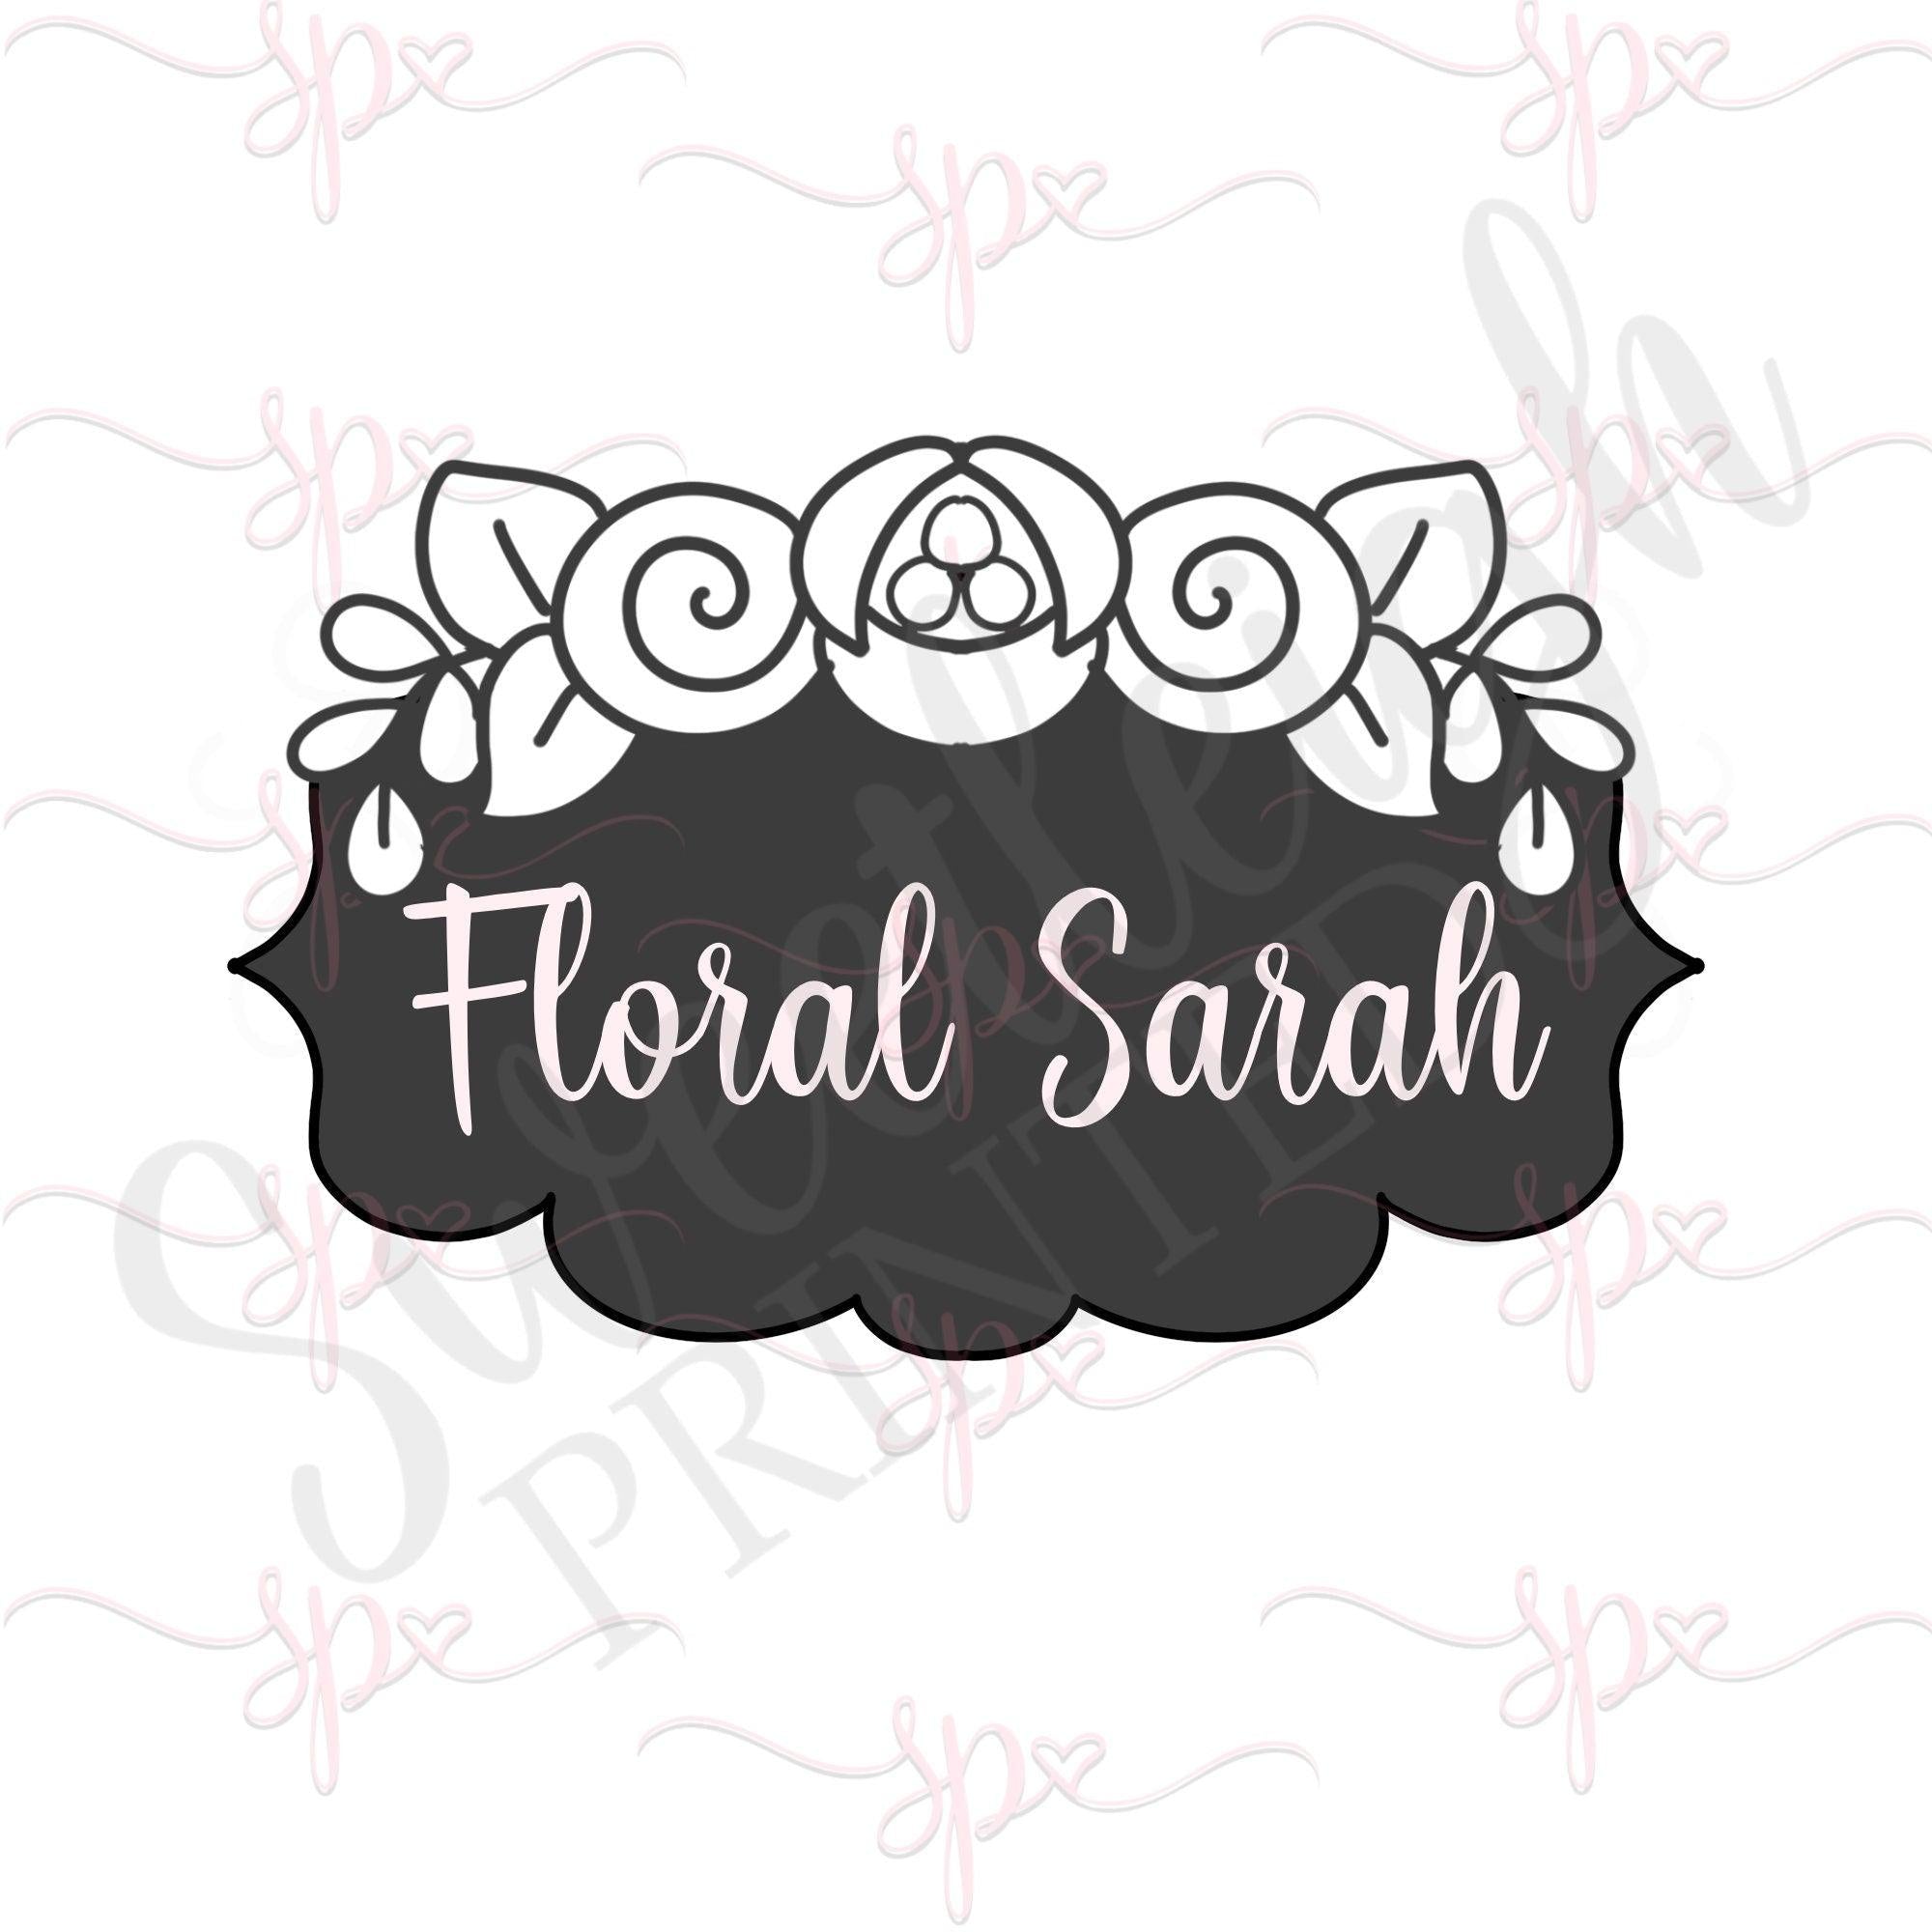 Floral Sarah Plaque Cookie Cutter - Sweetleigh 